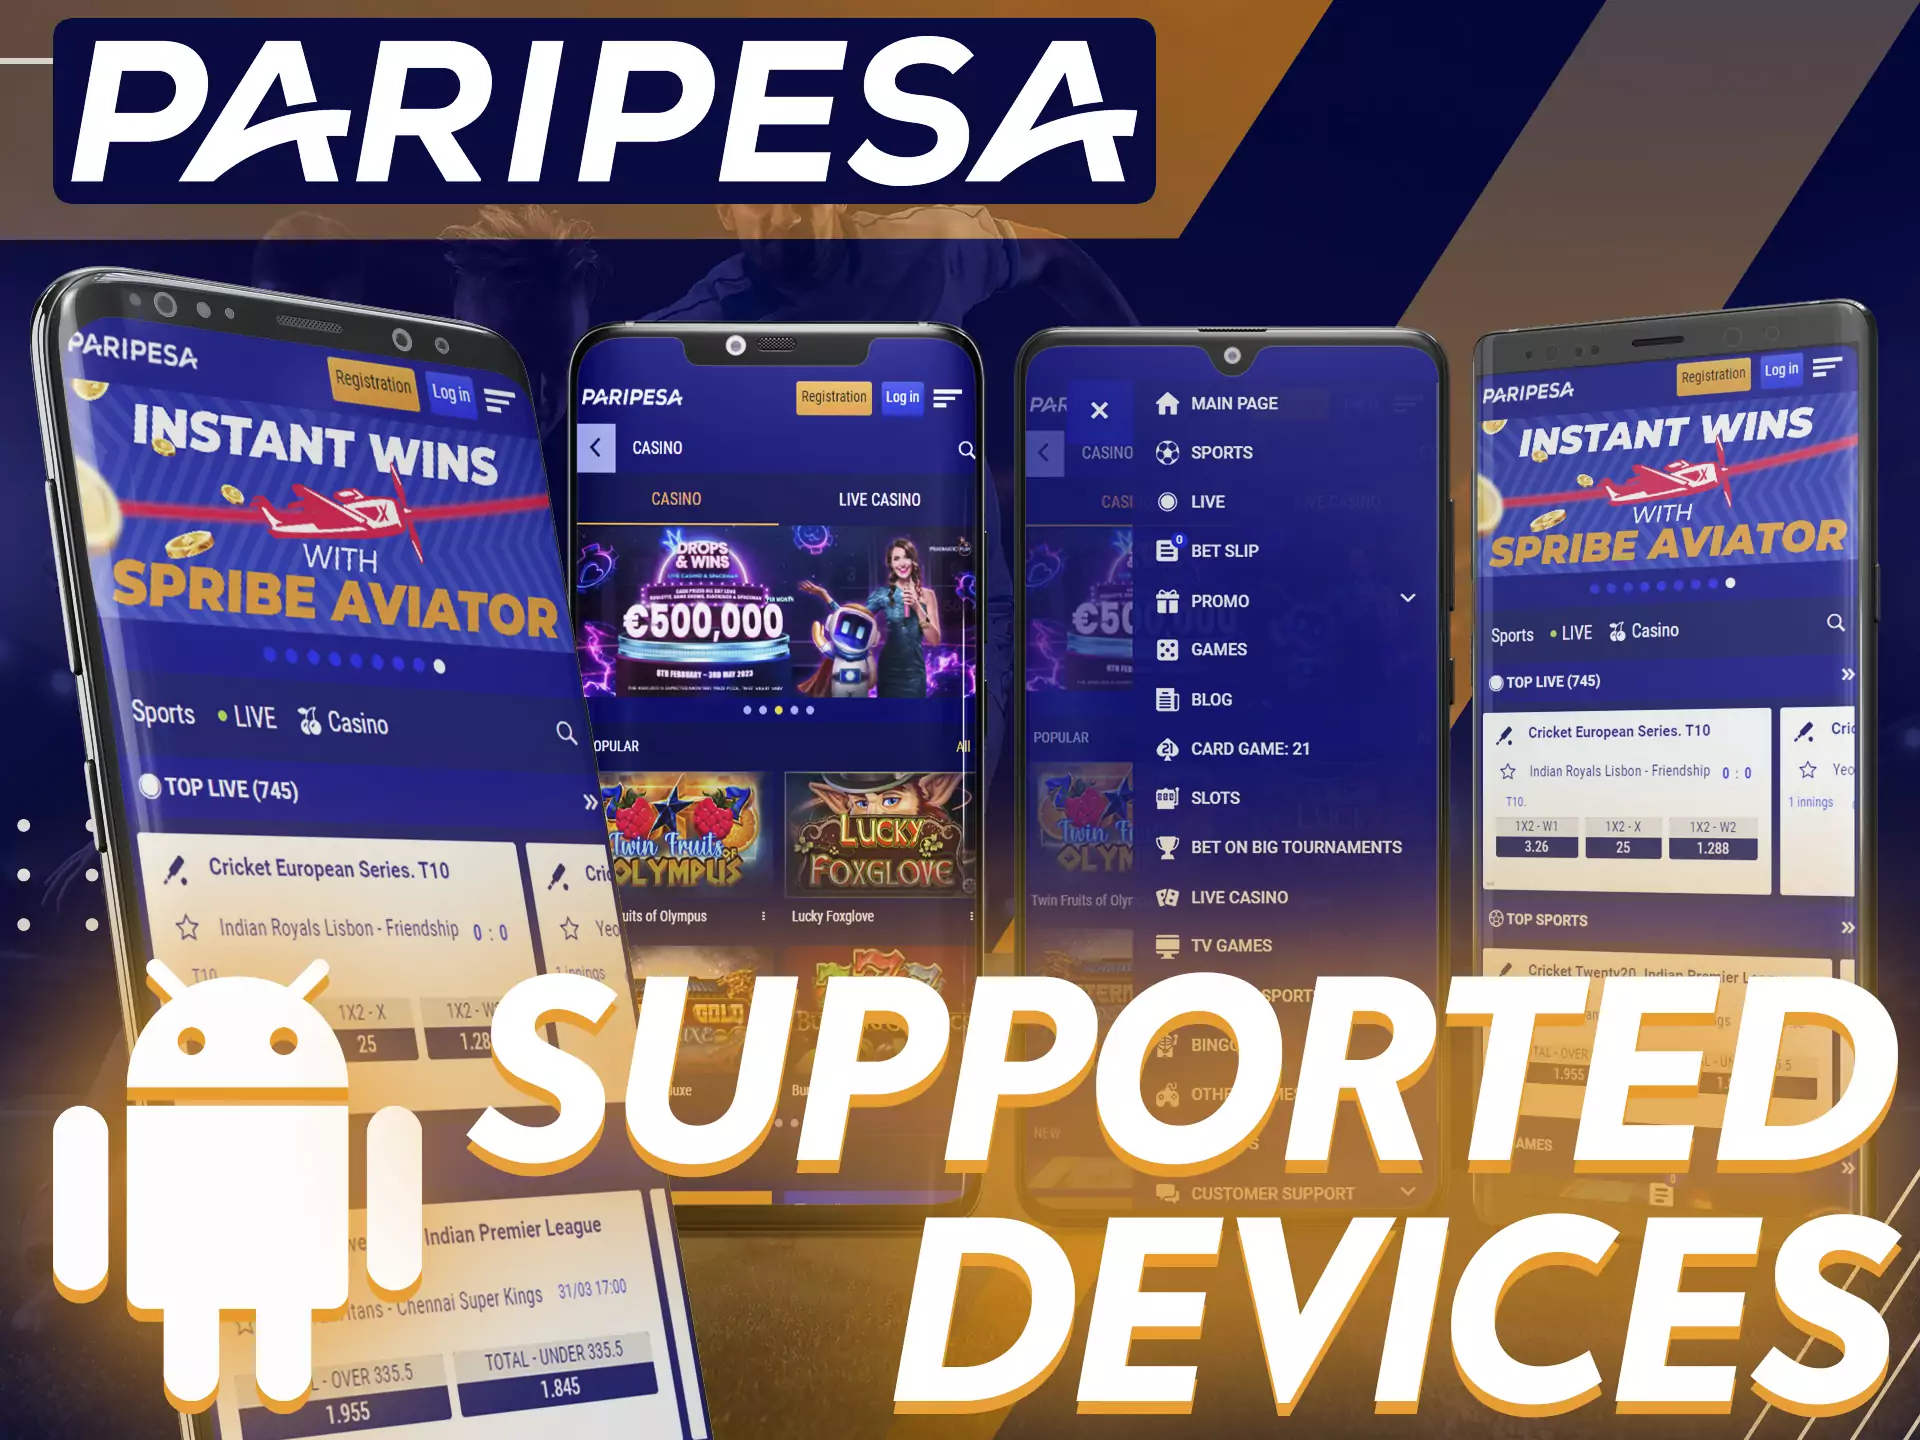 Paripesa app is supported on different Android devices.